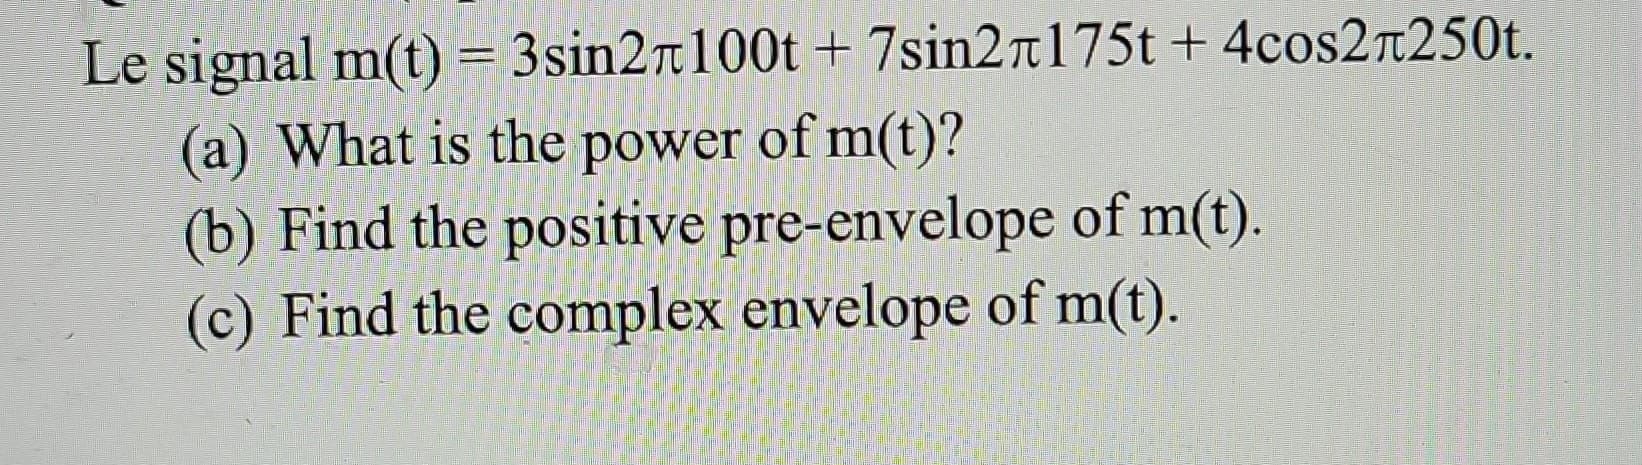 Le signal m(t) = 3sin2100t+7sin2л175t + 4сos2л250t.
(a) What is the power of m(t)?
(b) Find the positive pre-envelope of m(t).
(c) Find the complex envelope of m(t).